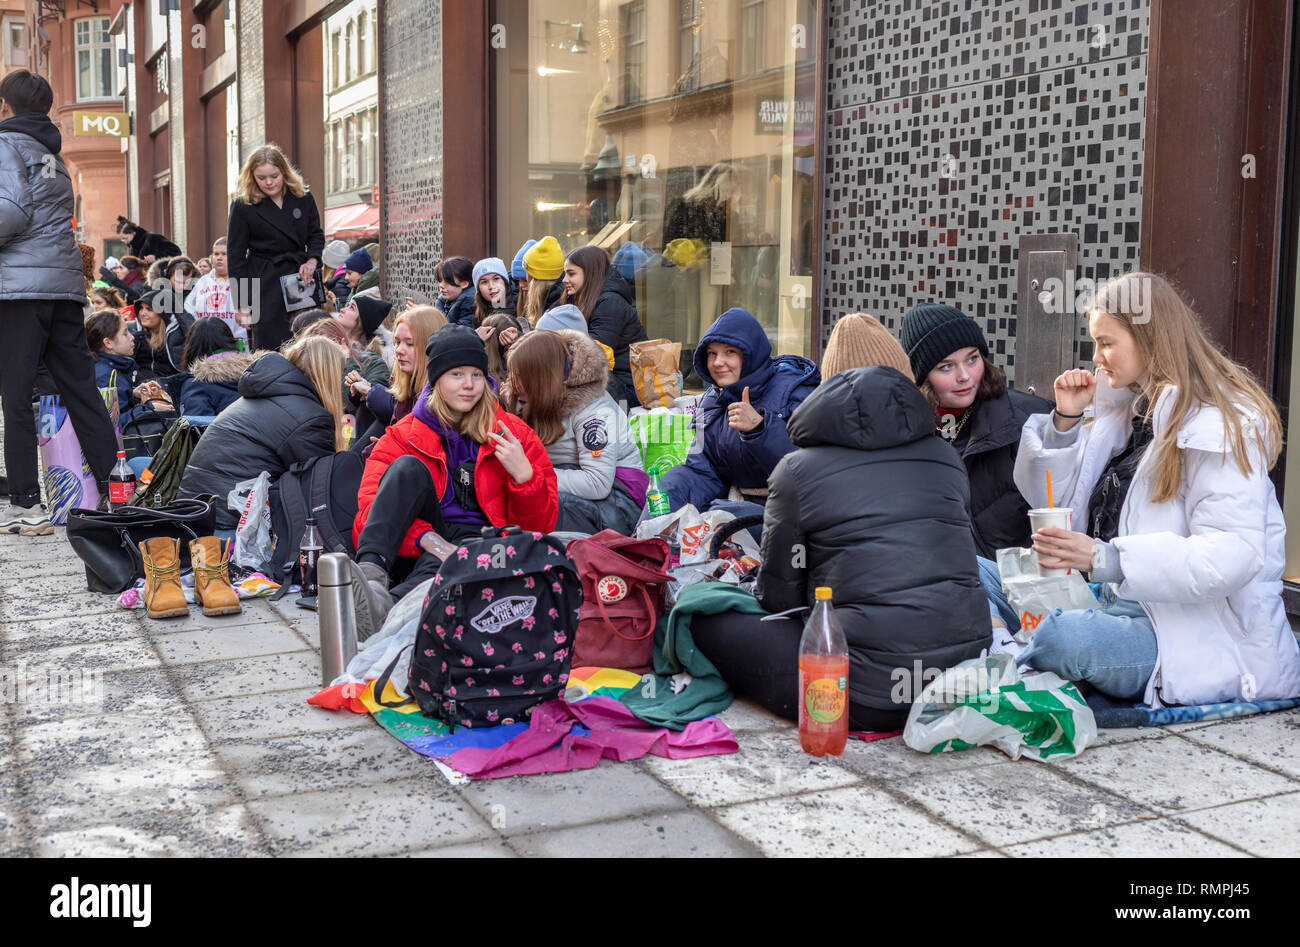 Stockholm, Sweden. 15th February, 2019. Fans waiting outside Bengans record shop in Stockholm for a chance to meet Billie Eilish and get a signed fan card. Credit: Per Grunditz/Alamy Live News Stock Photo